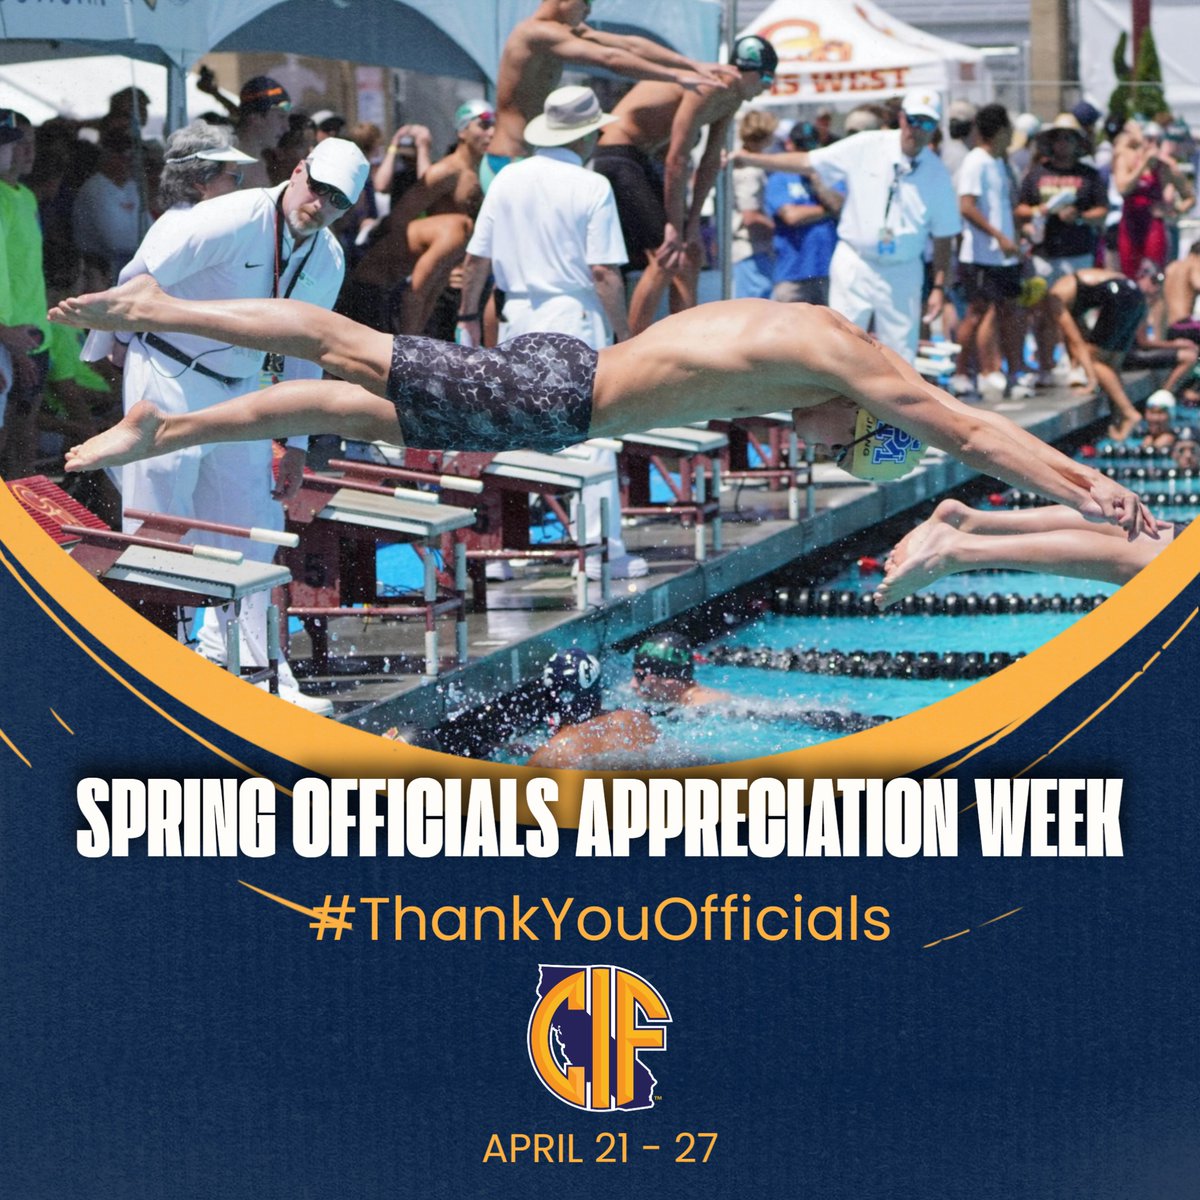 This week is CIF Spring Officials Appreciation Week! Thank you to all the hardworking & passionate officials who dedicate their time to education-based athletics! Competition would not be possible without you! #ThankYouOfficials